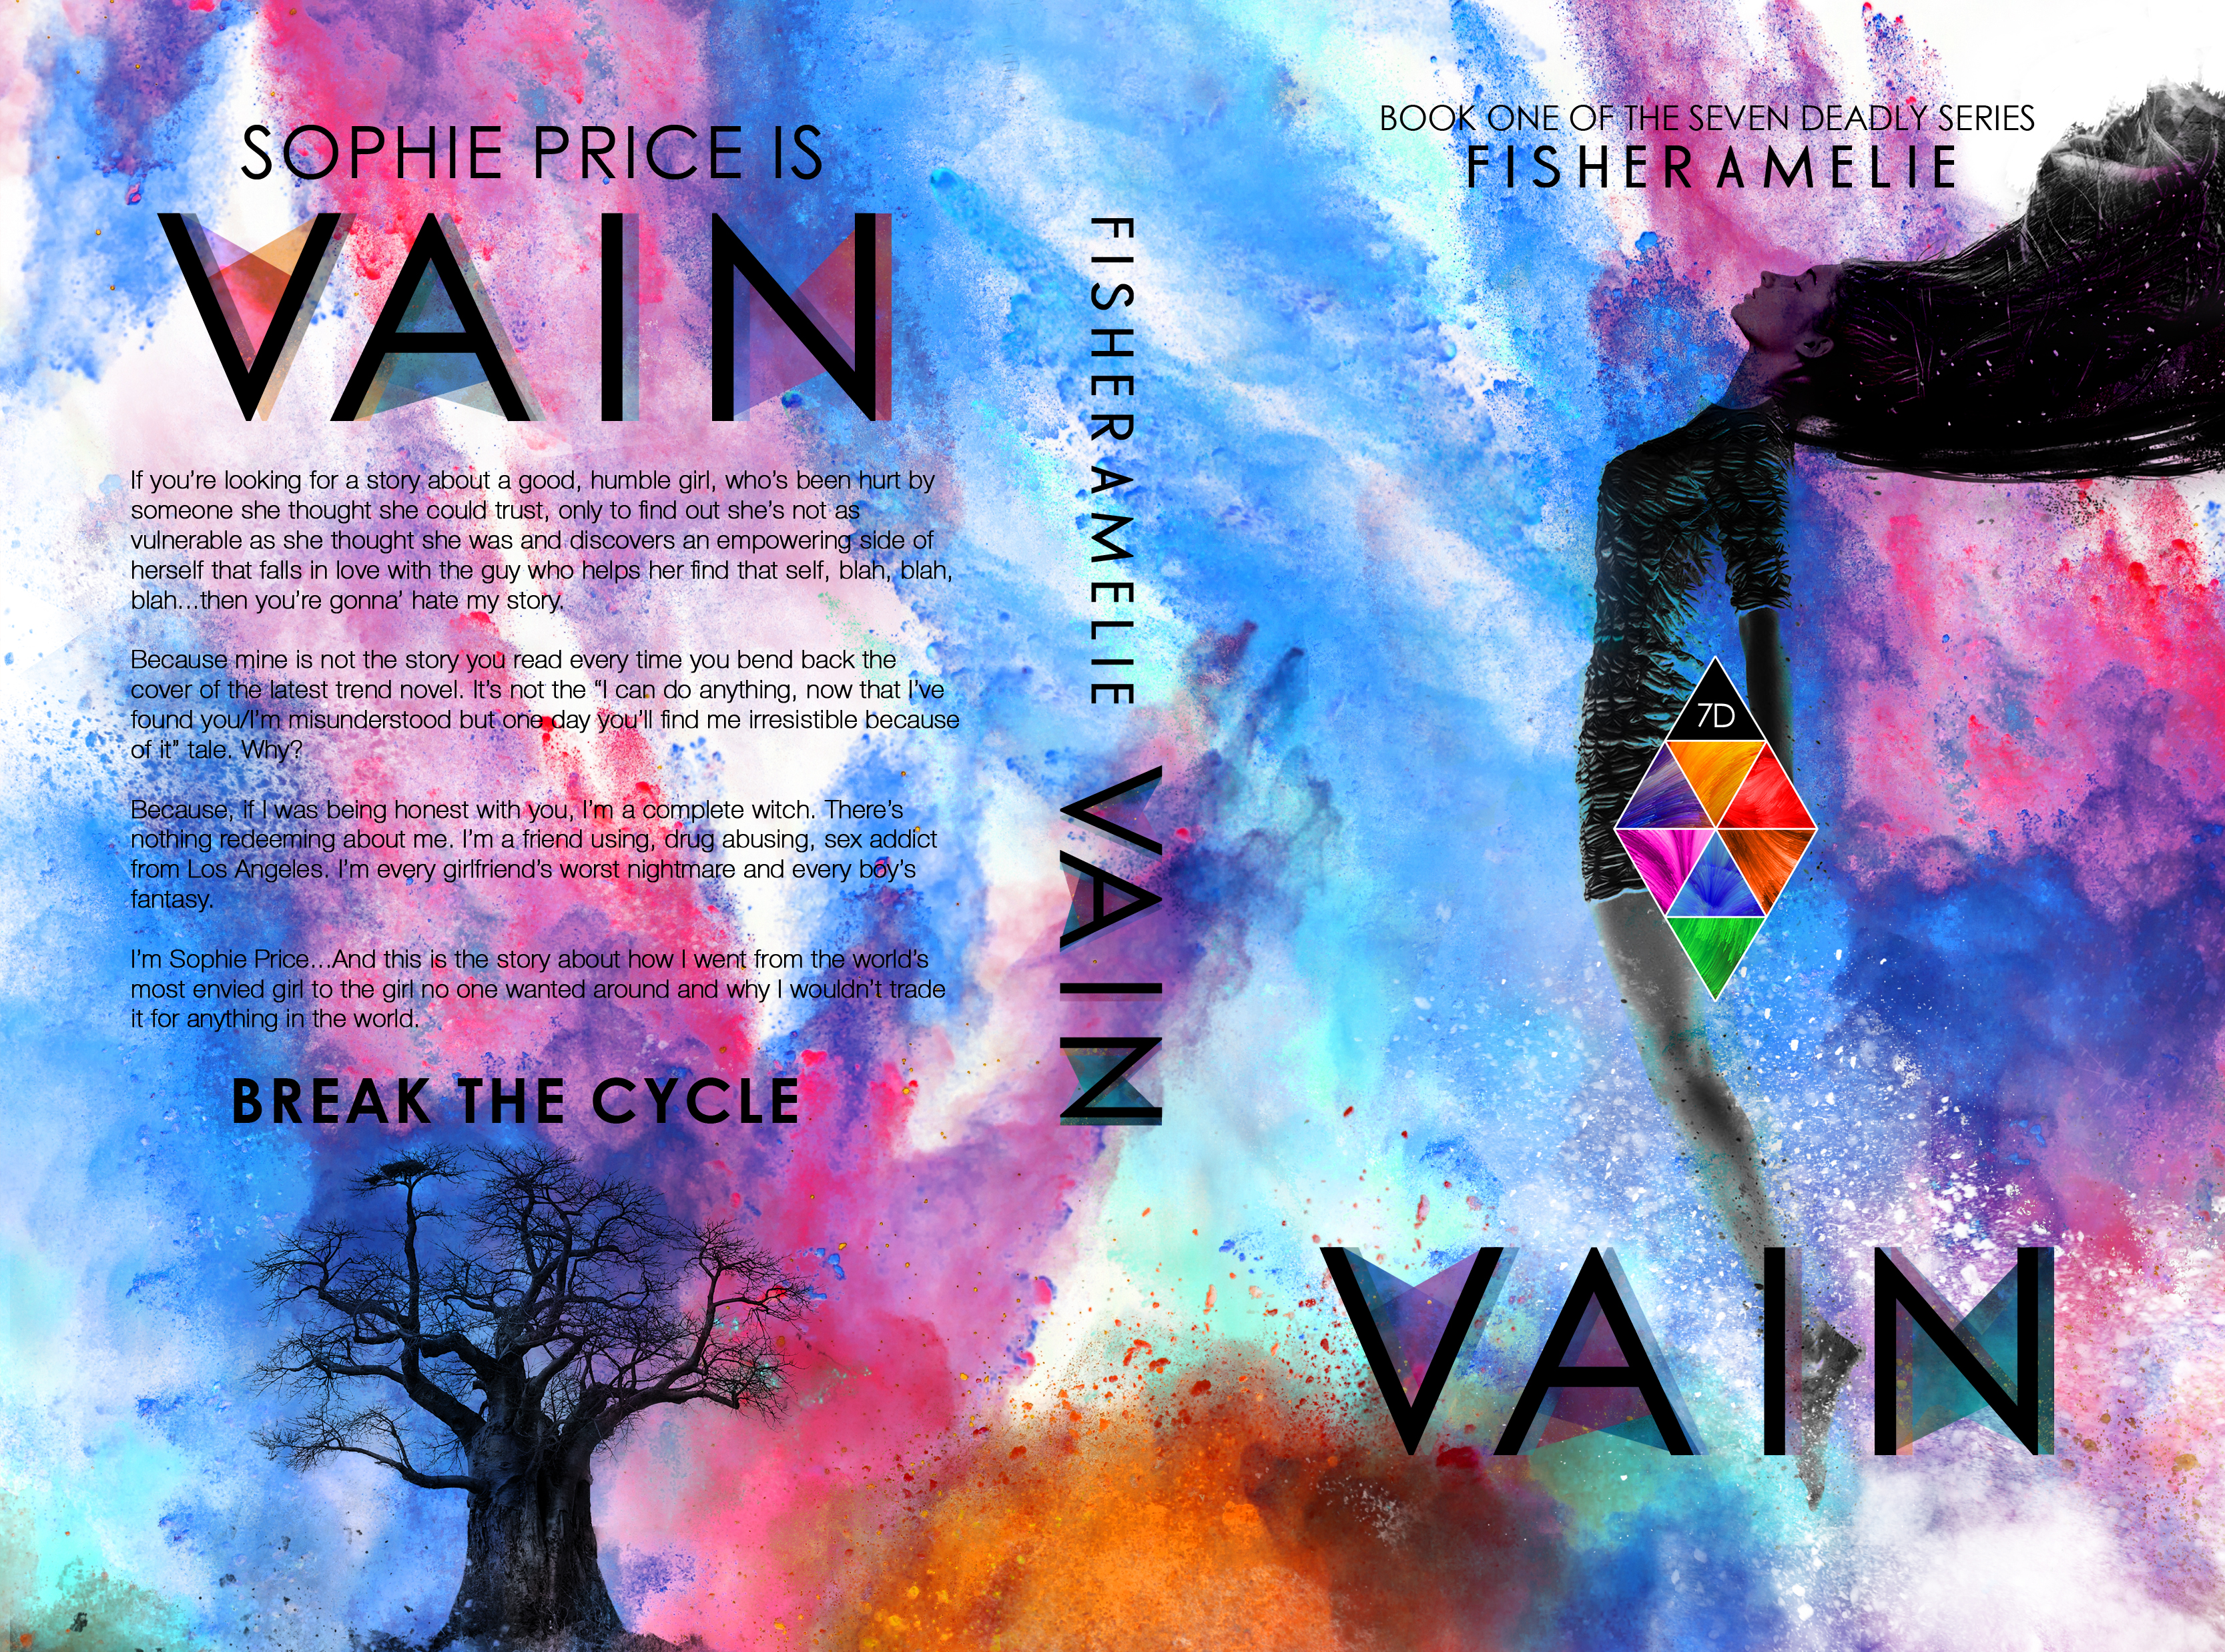 vain_BookCover5x8_BW_390